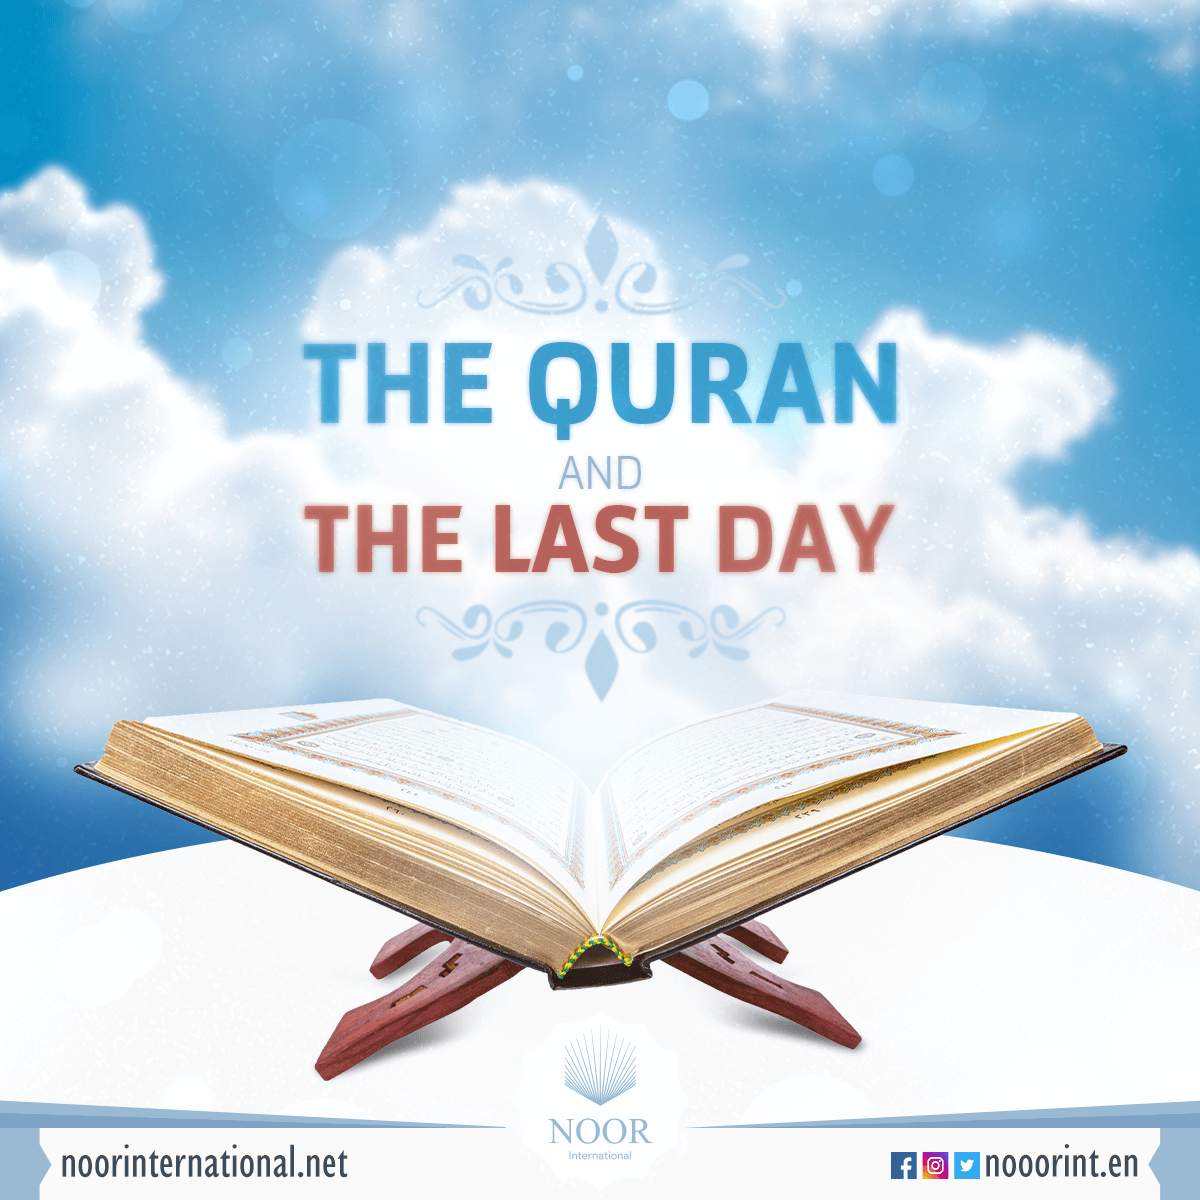 The Quran and the last day